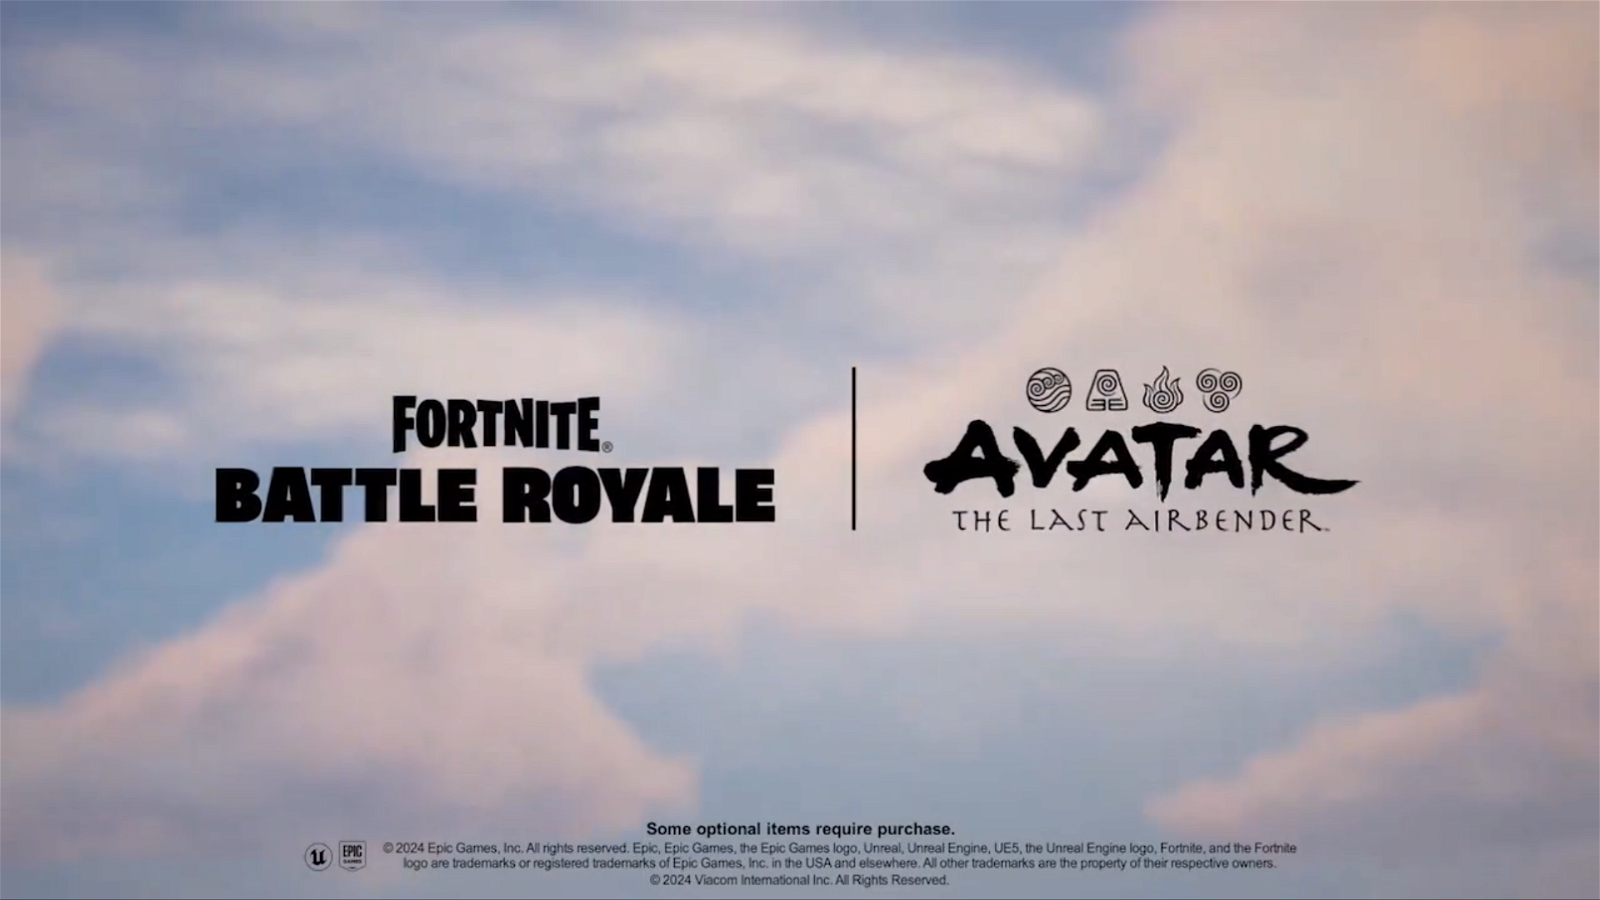 Announcement reveal of Fortnite and Avatar